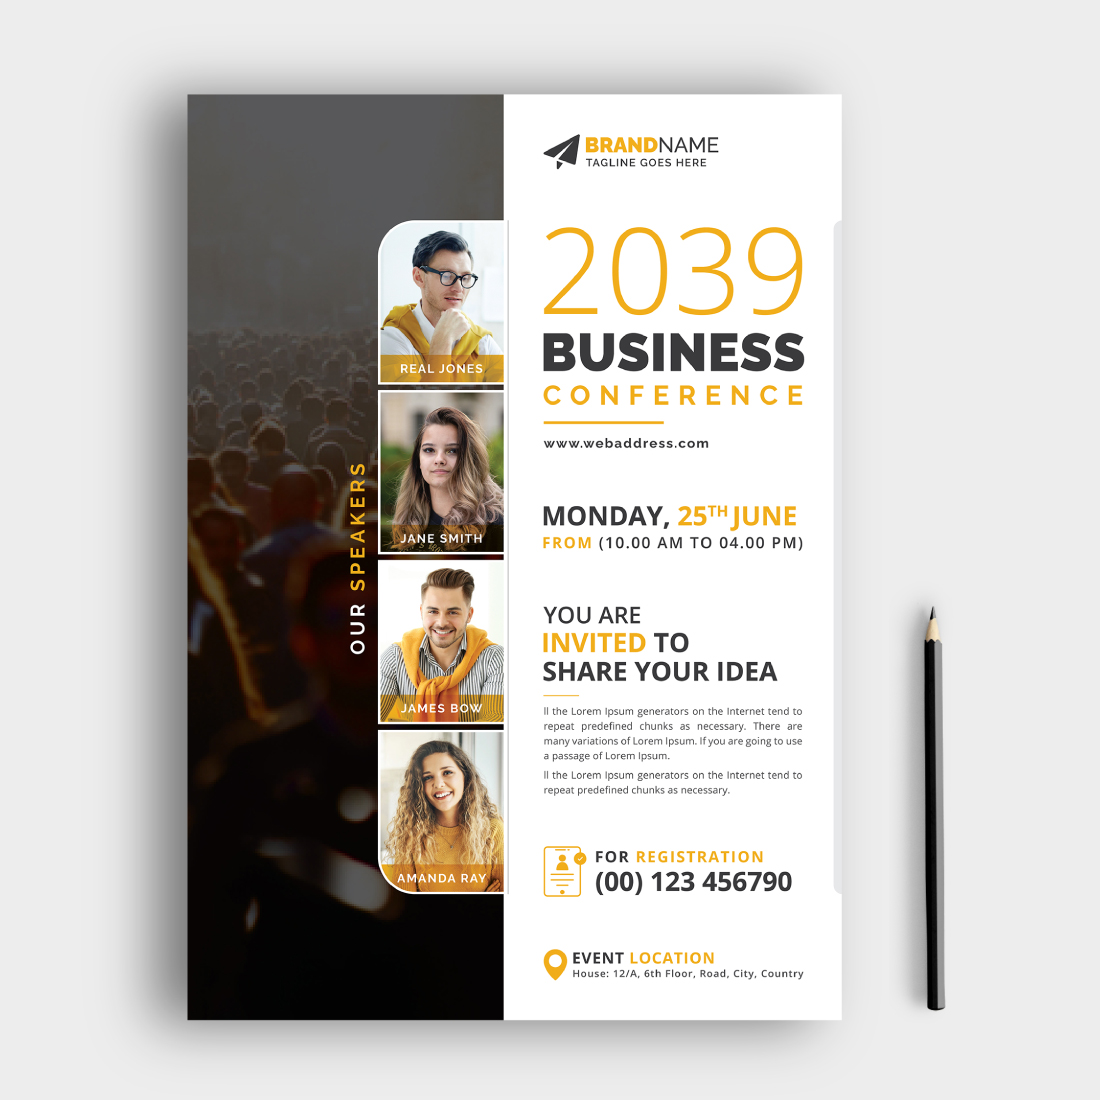 Conference Flyer Template cover image.